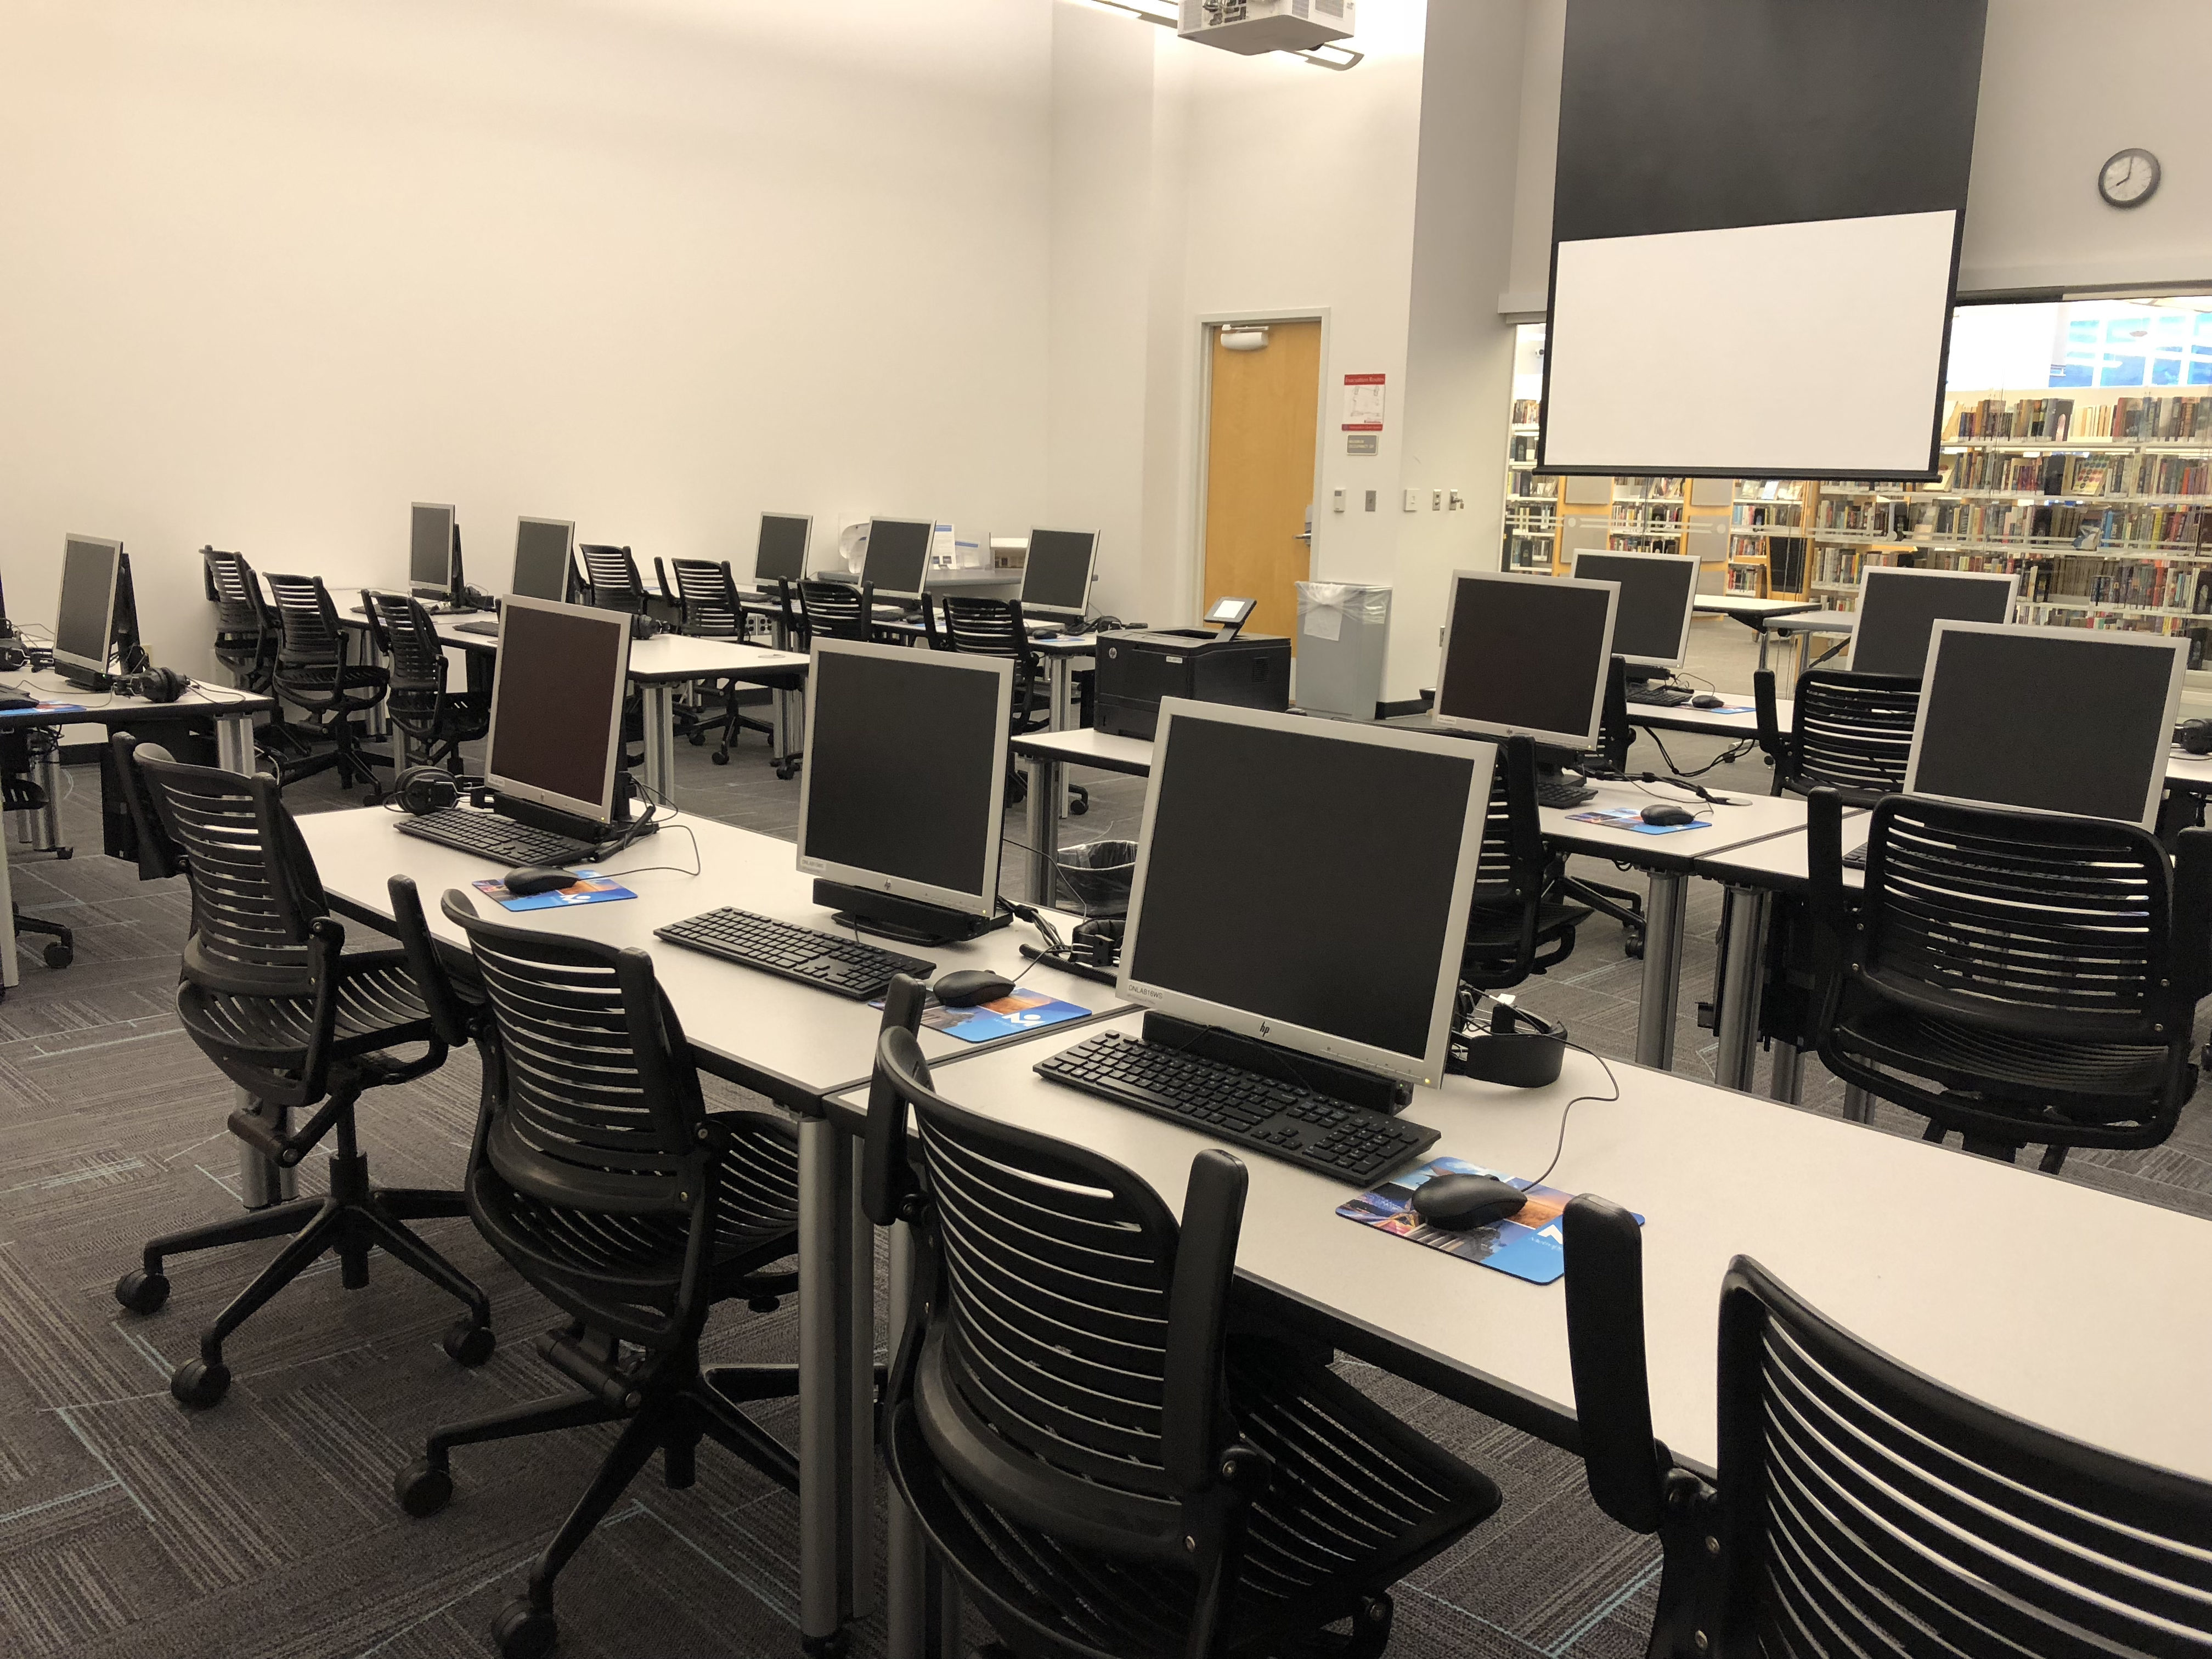 Route 66 Computer Lab with rows of computers and large screen